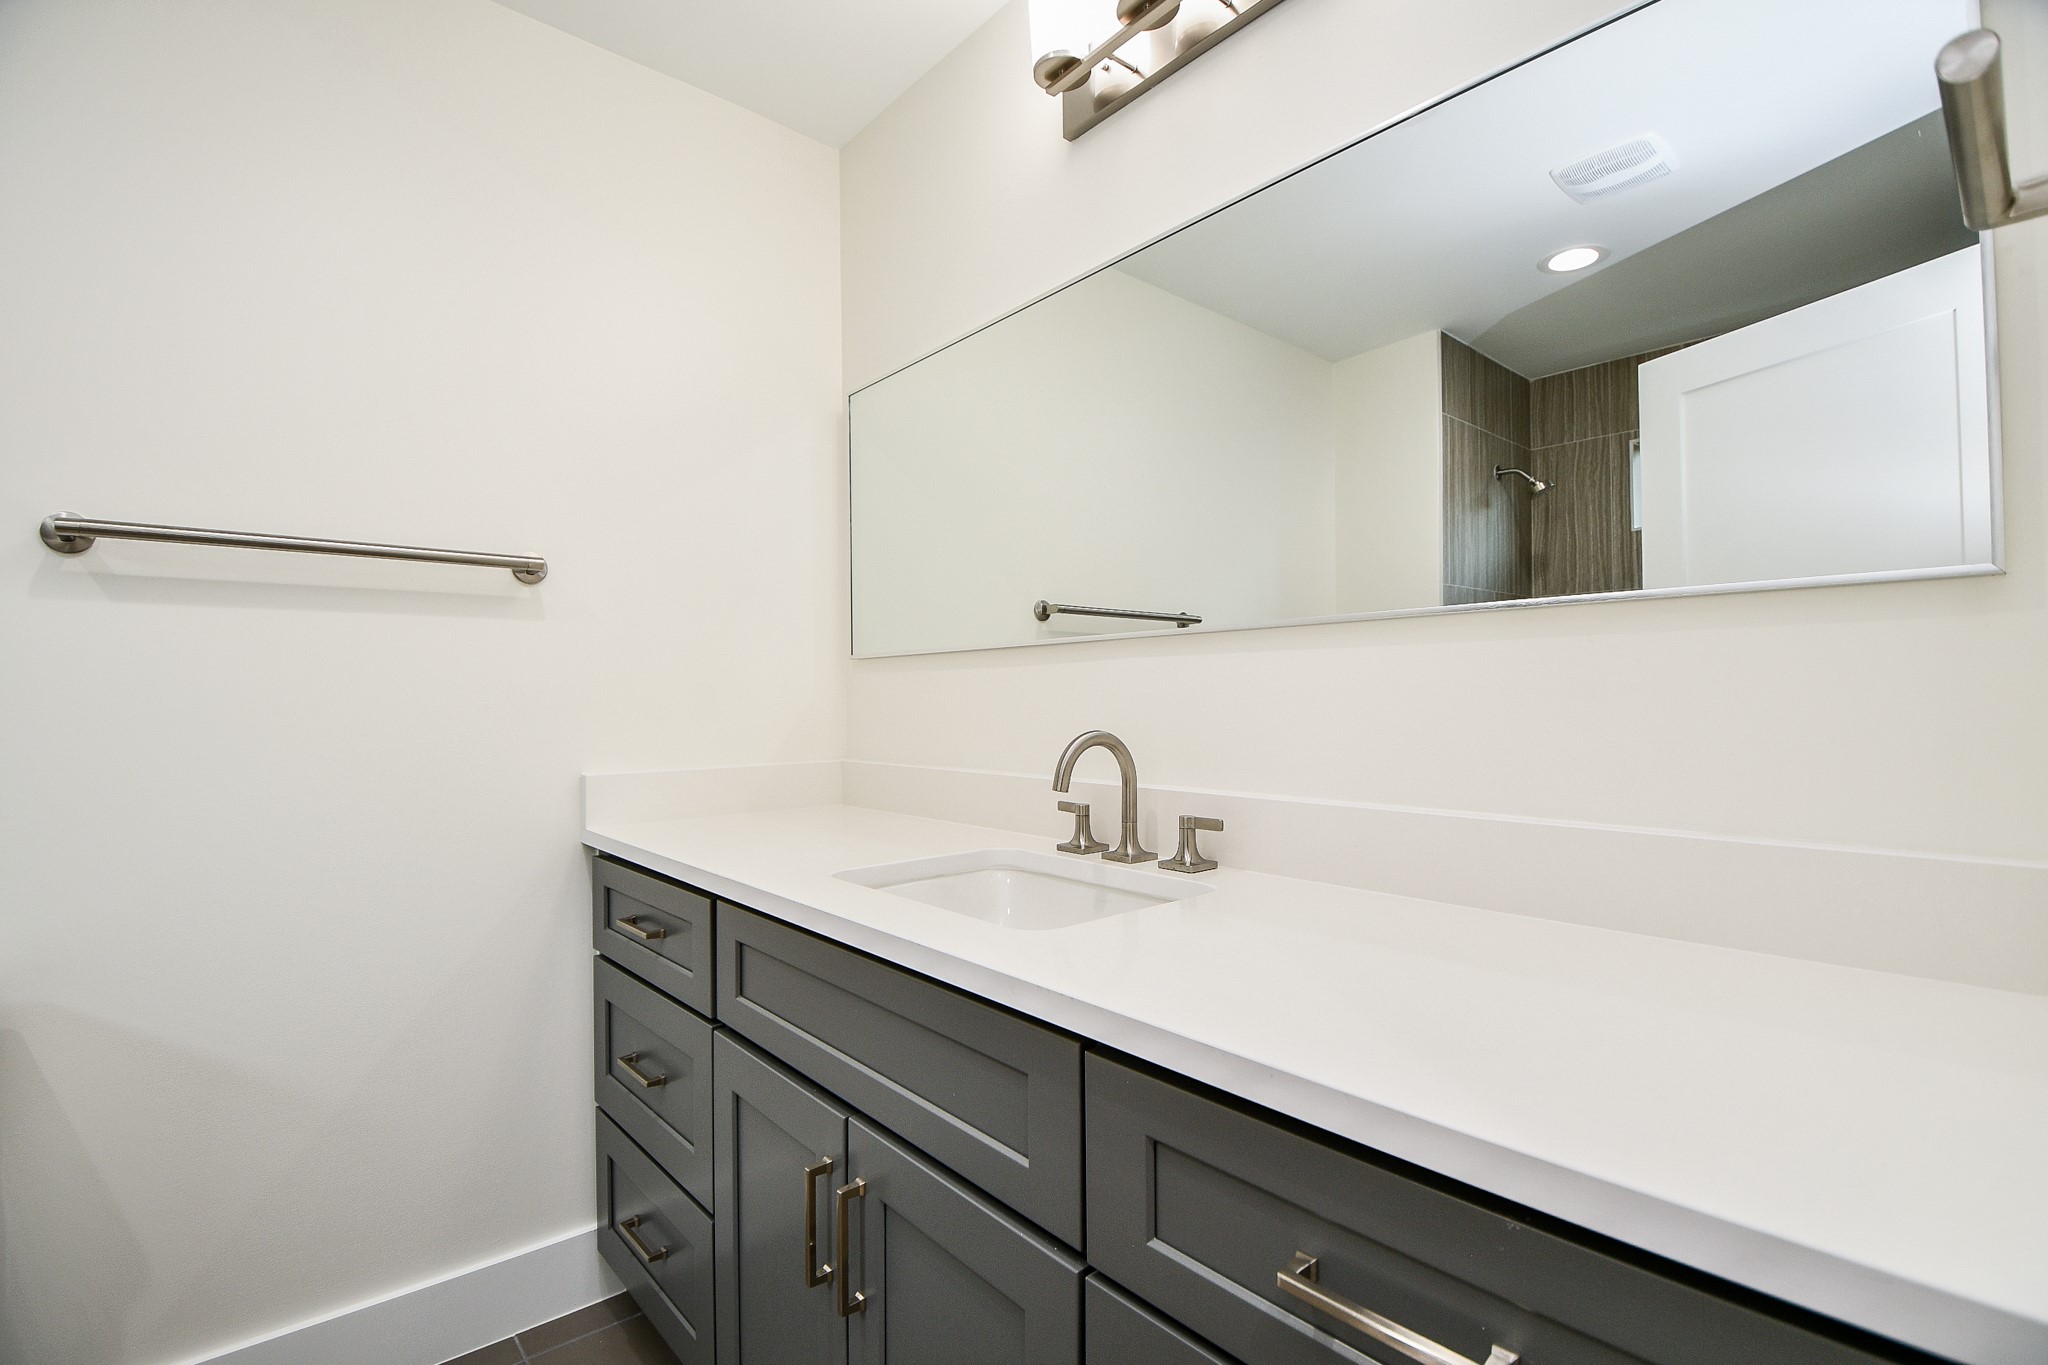 This trim, wall-wide mirror in a secondary bath is welcomed, over the length of a generous countertop!